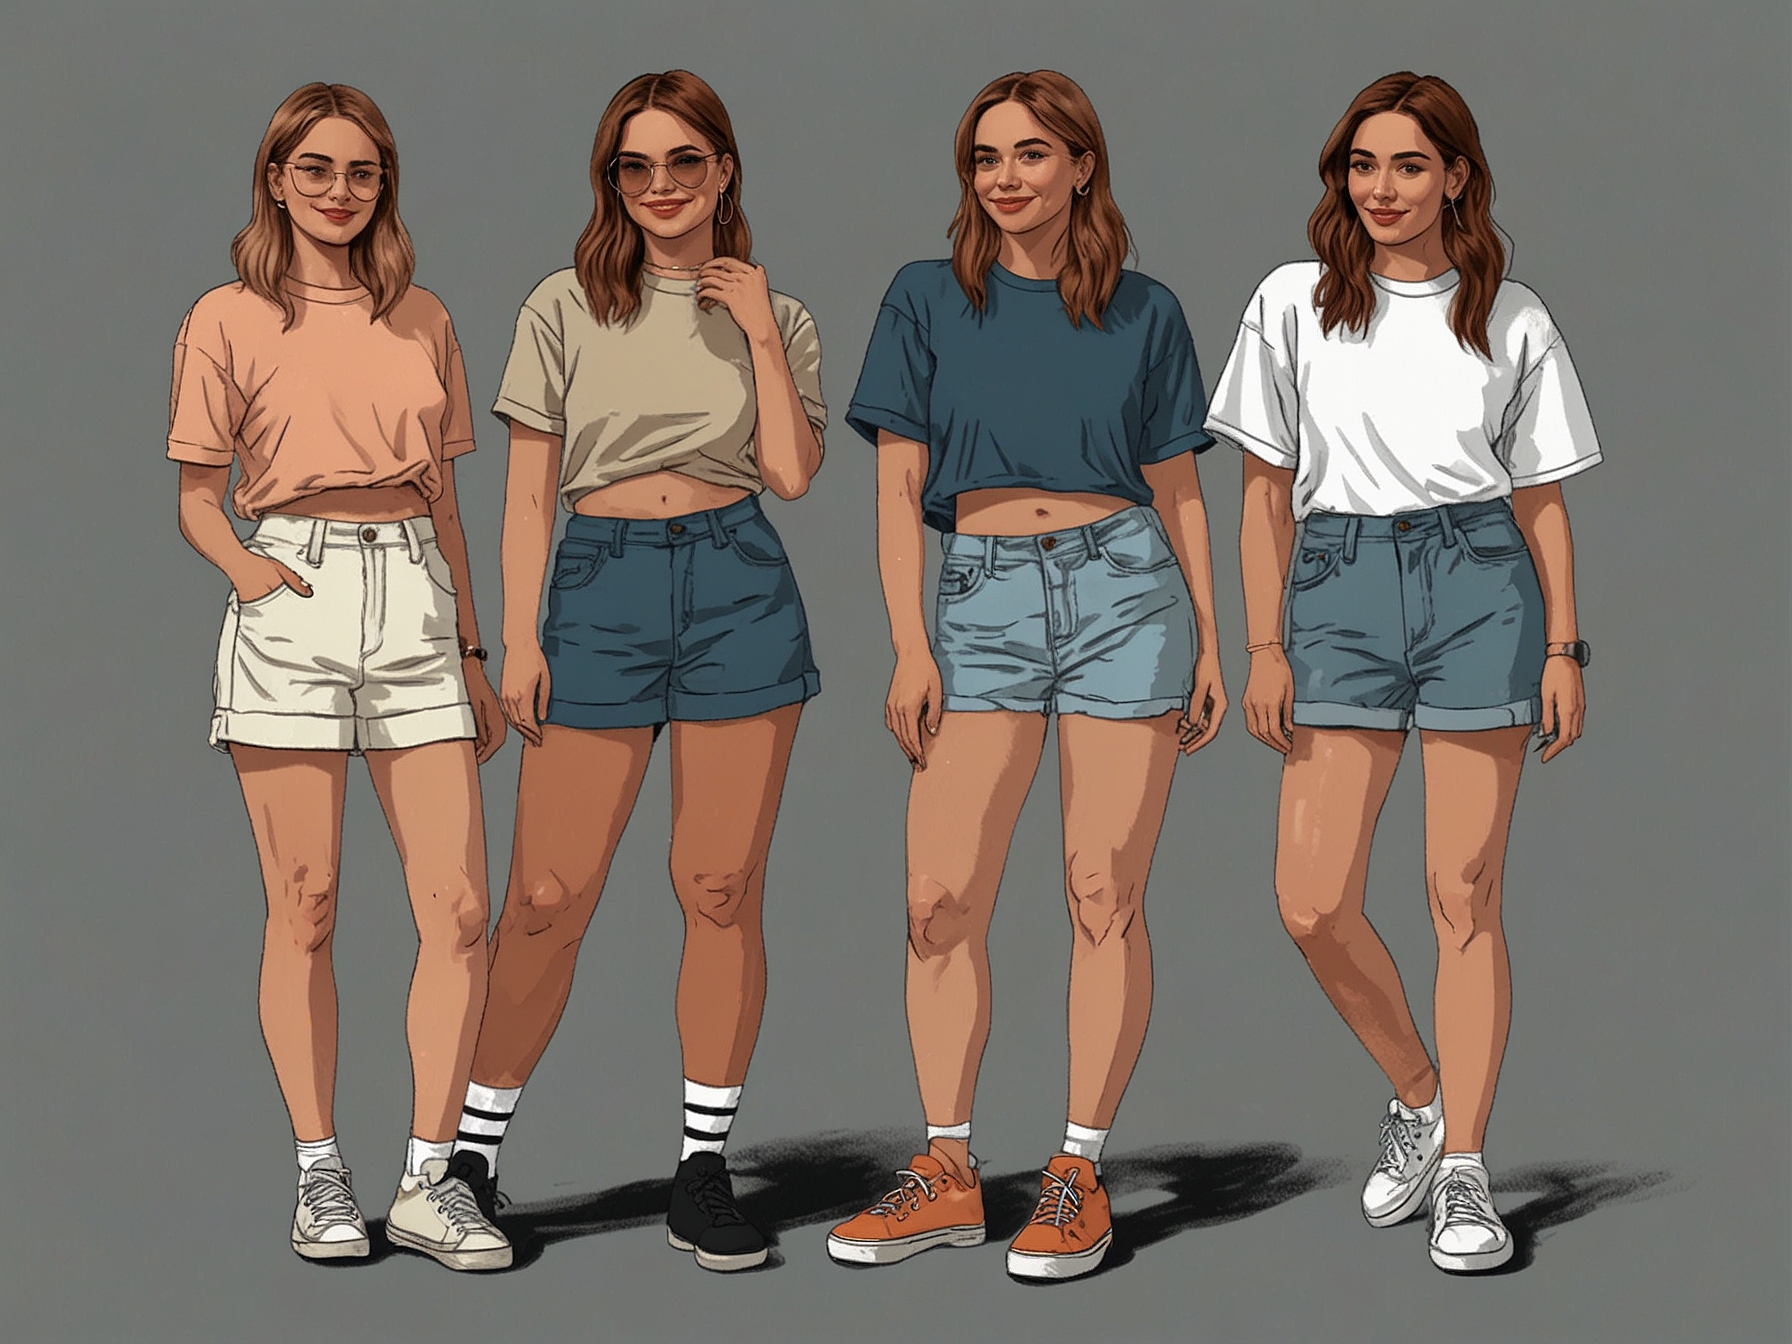 An illustration showing millennial influencers sporting ankle socks with a casual, minimalist outfit, highlighting their preference for understated fashion.